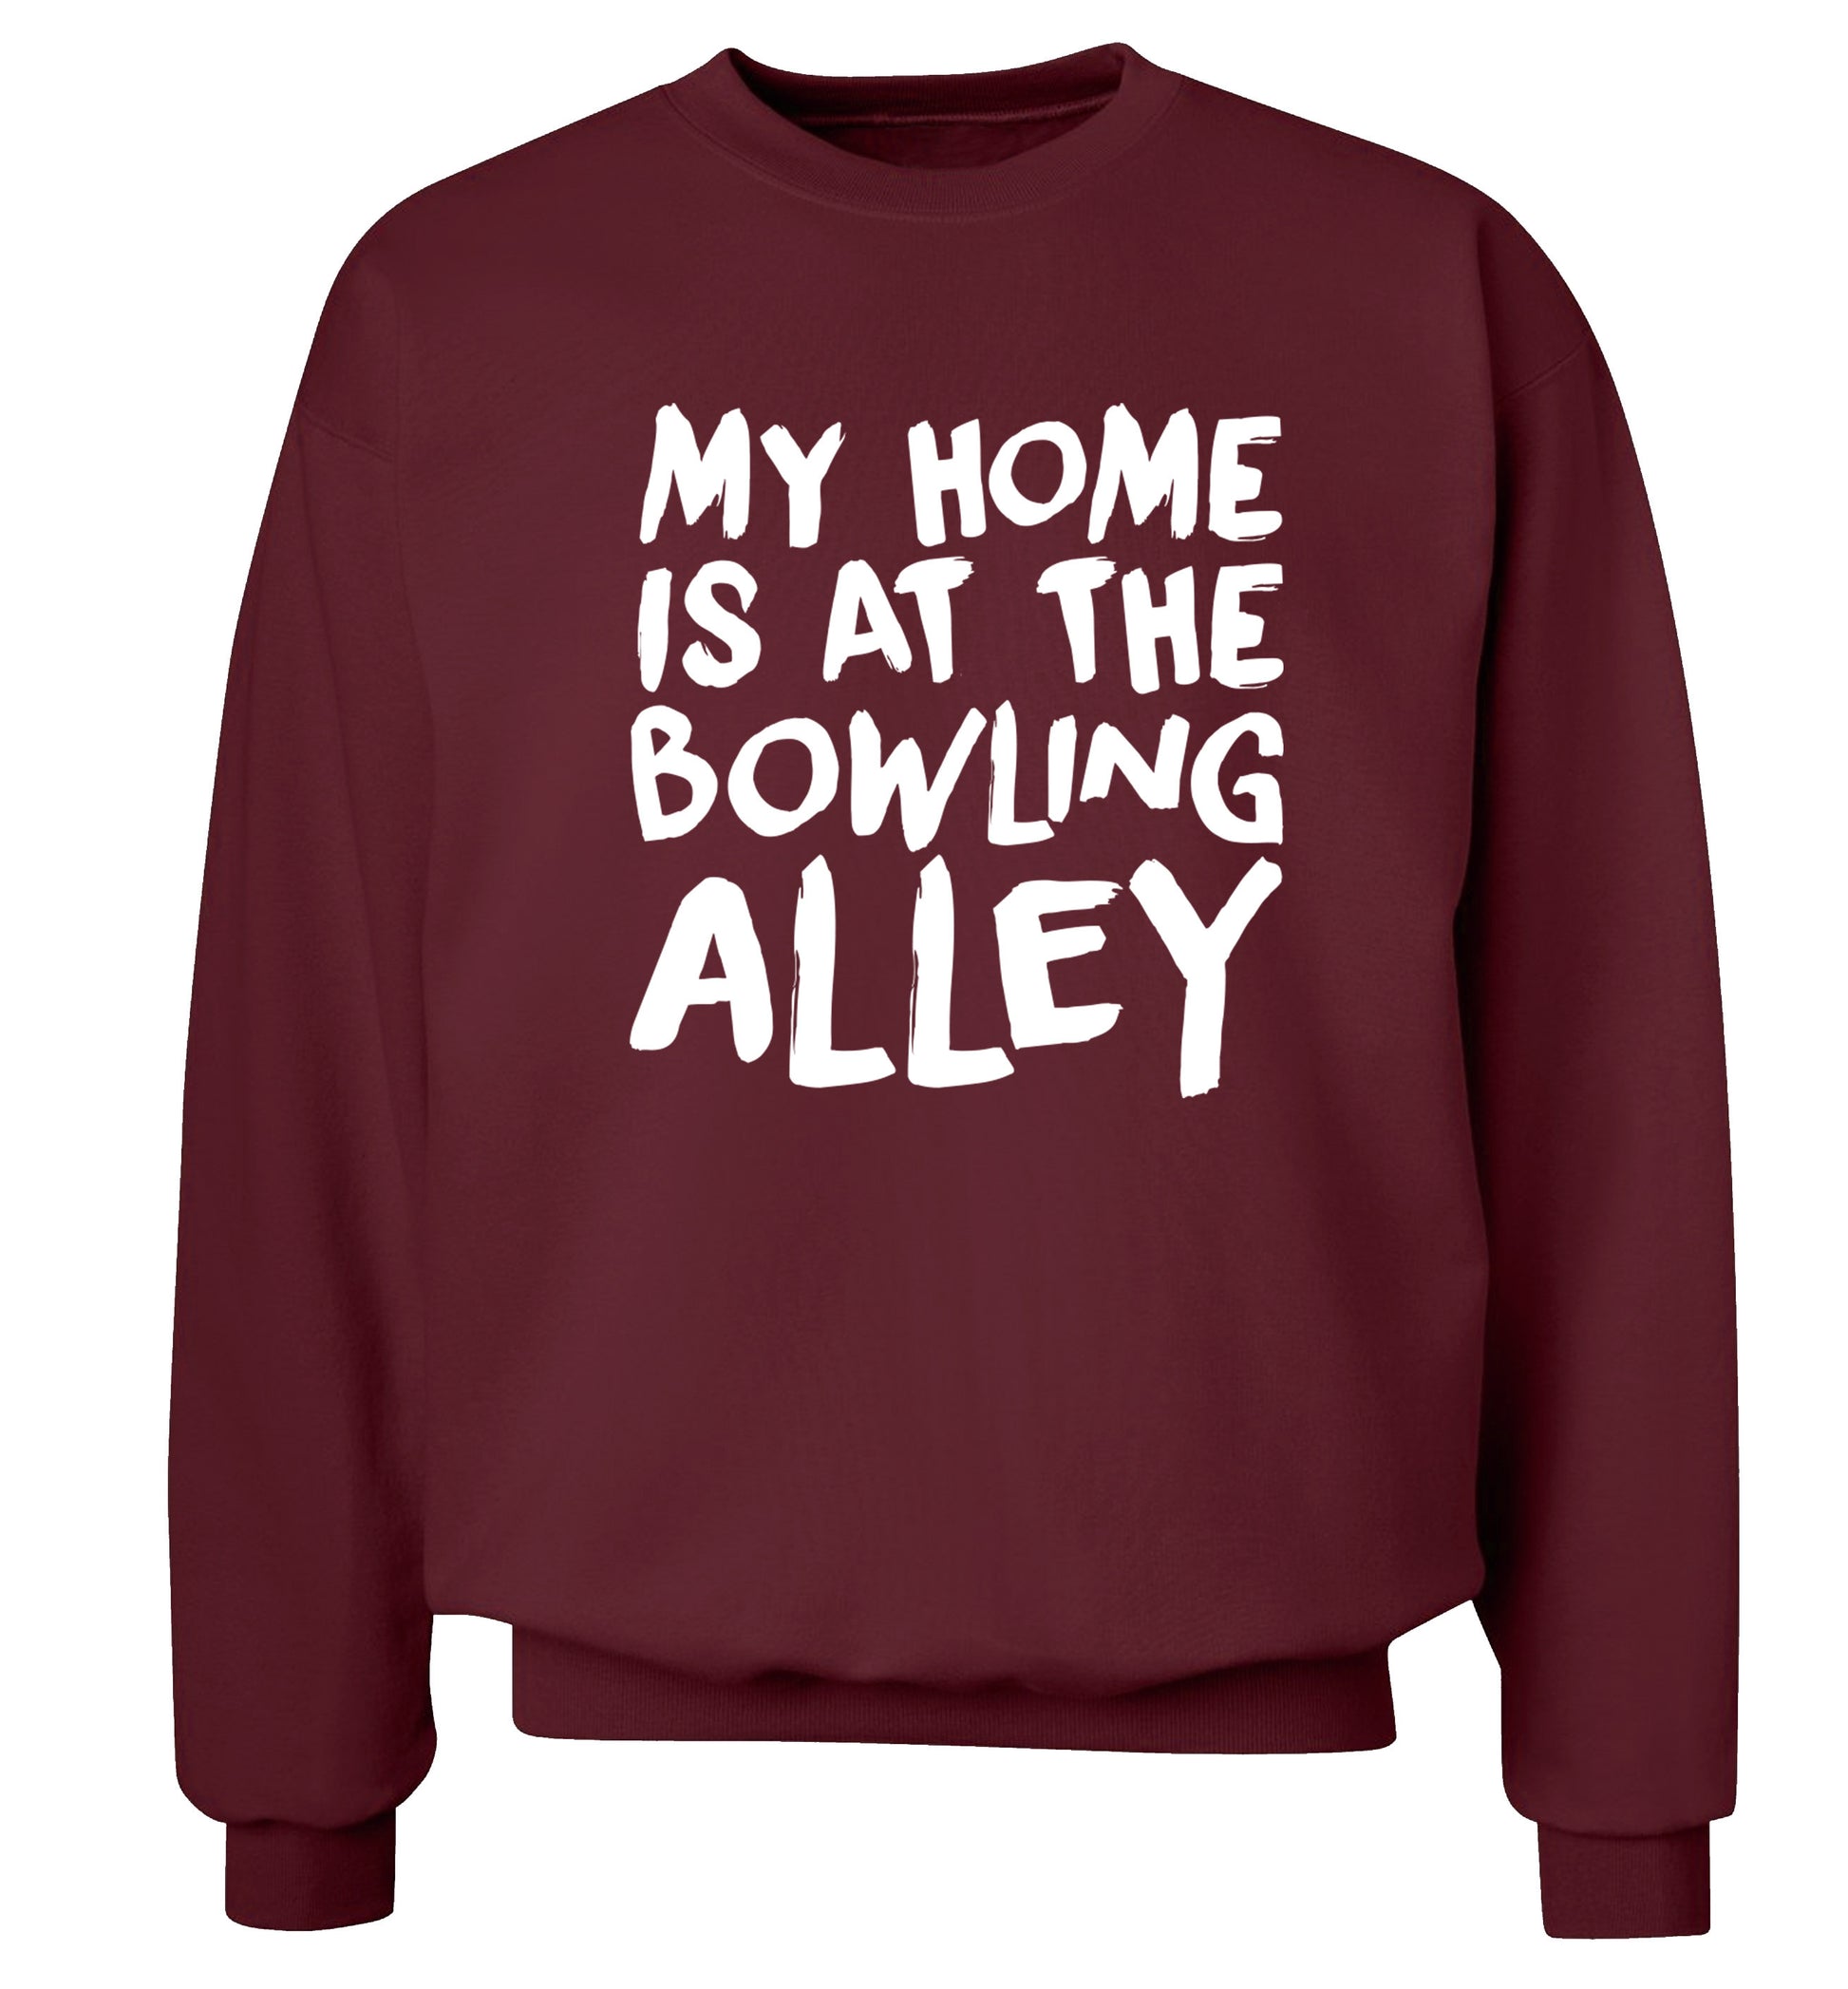 My home is at the bowling alley Adult's unisex maroon Sweater 2XL